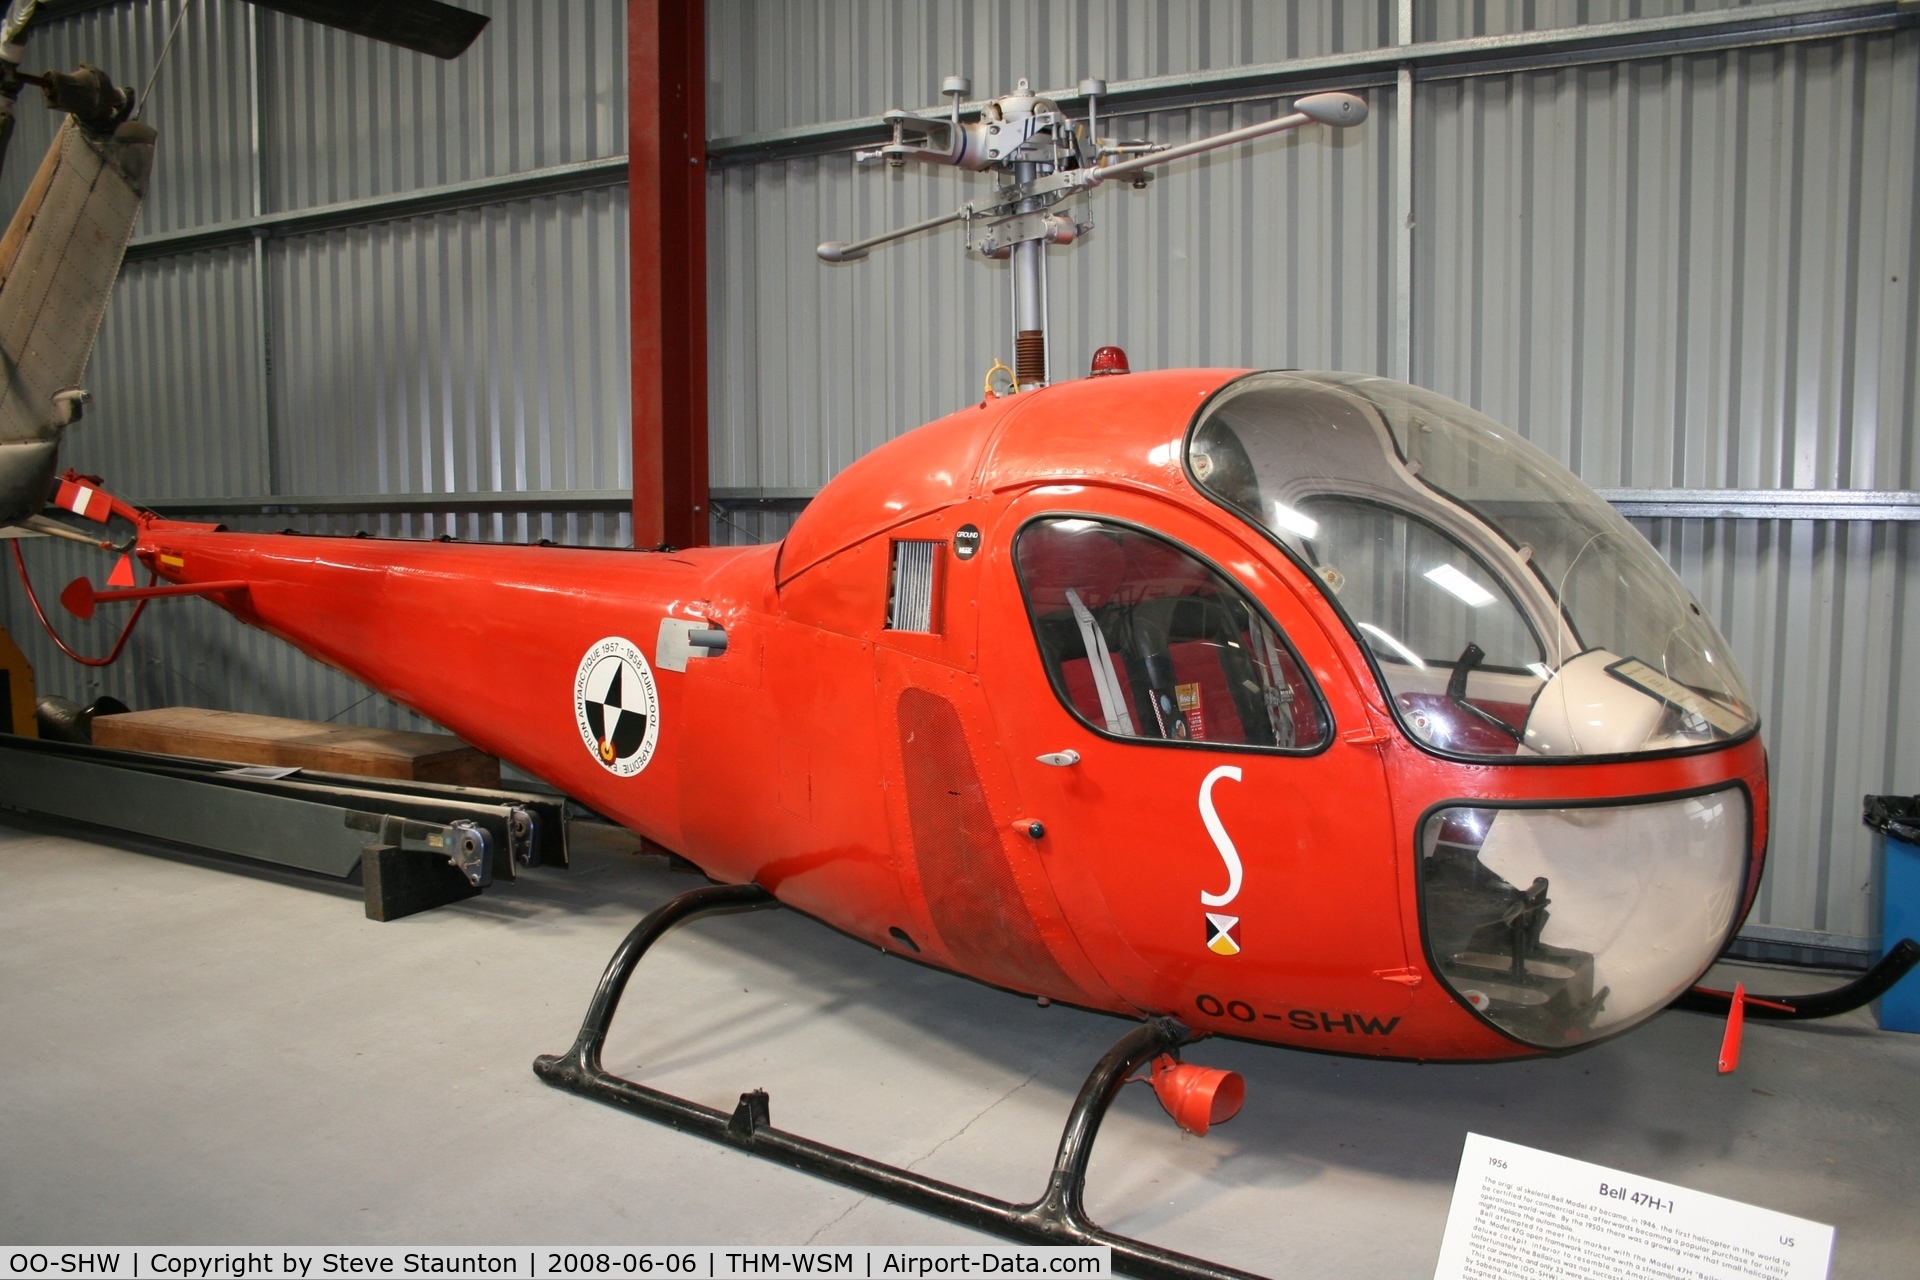 OO-SHW, 1956 Bell 47H-1 C/N 1538, Taken at the Helicopter Museum (http://www.helicoptermuseum.co.uk/)